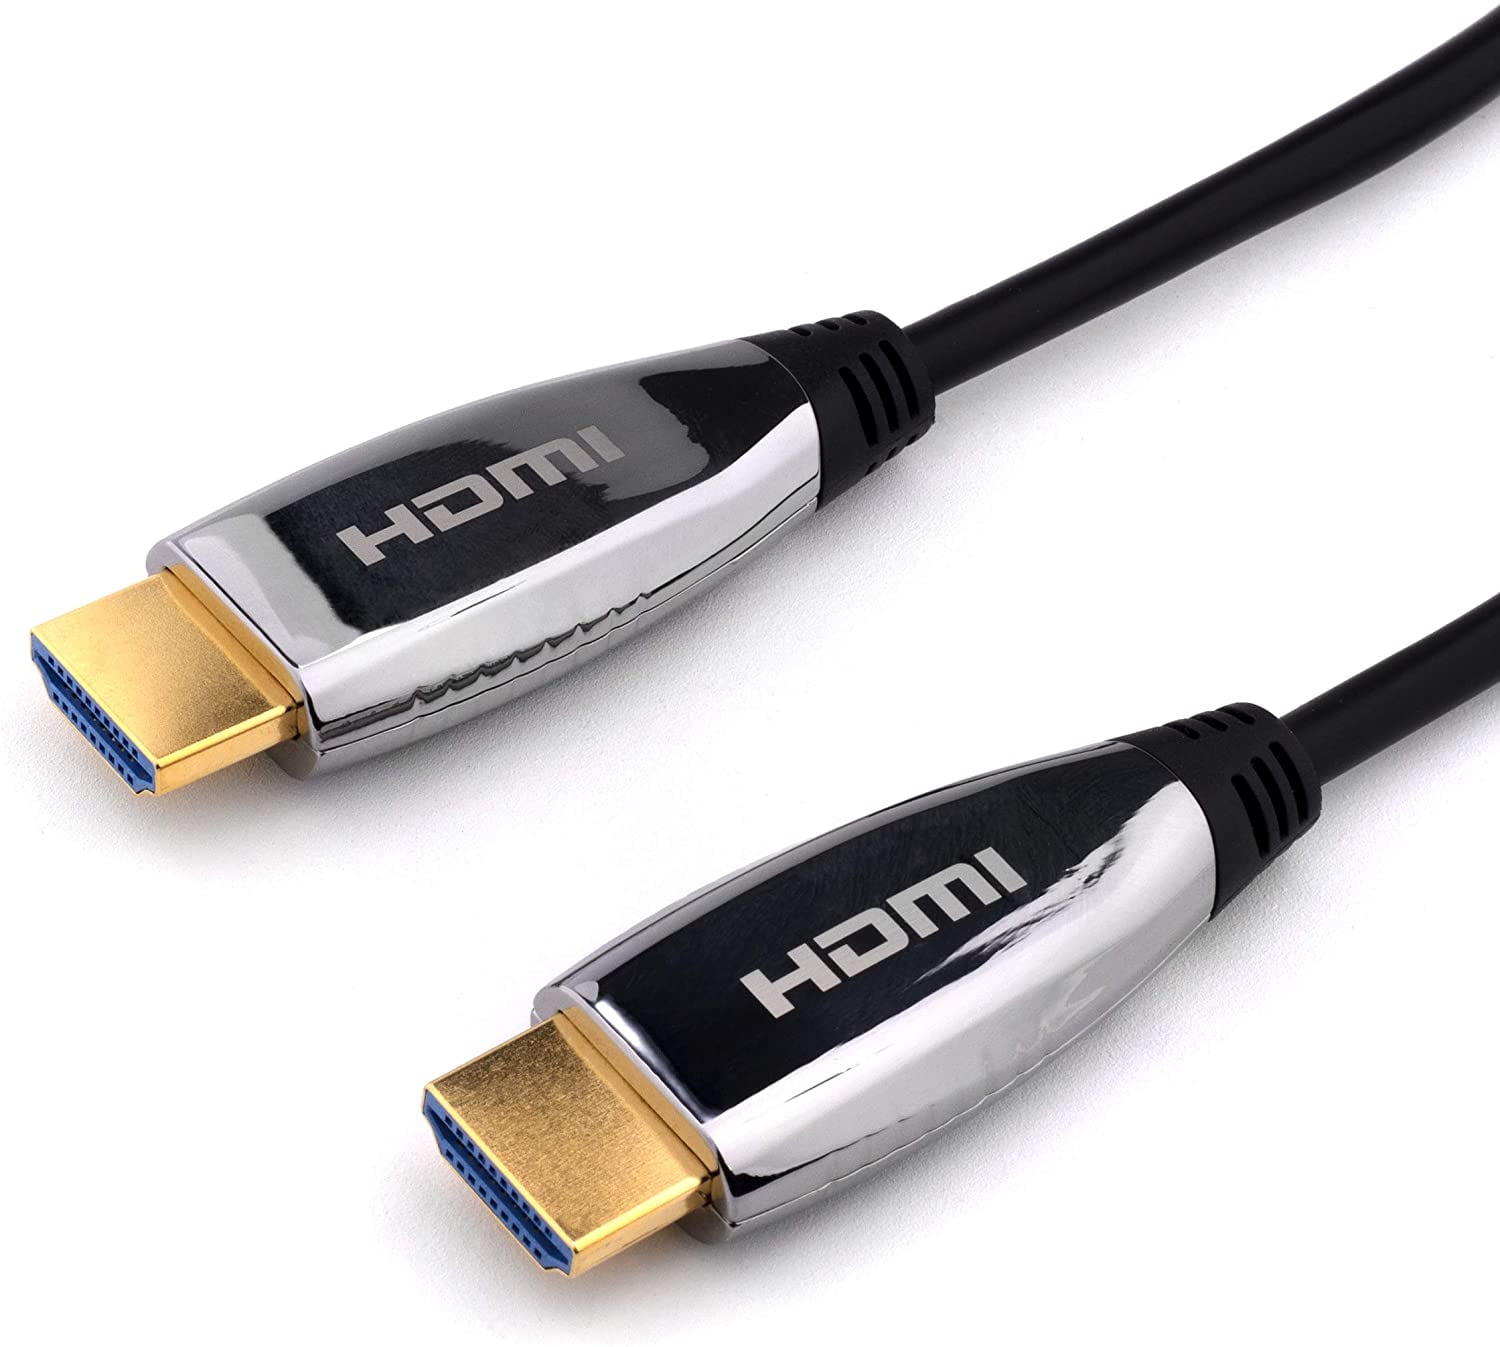 THE CIMPLE CO - 4K HDMI Fiber Optic Cable - 20 Feet - High Speed 18Gbps  4K@60Hz Gold Plated